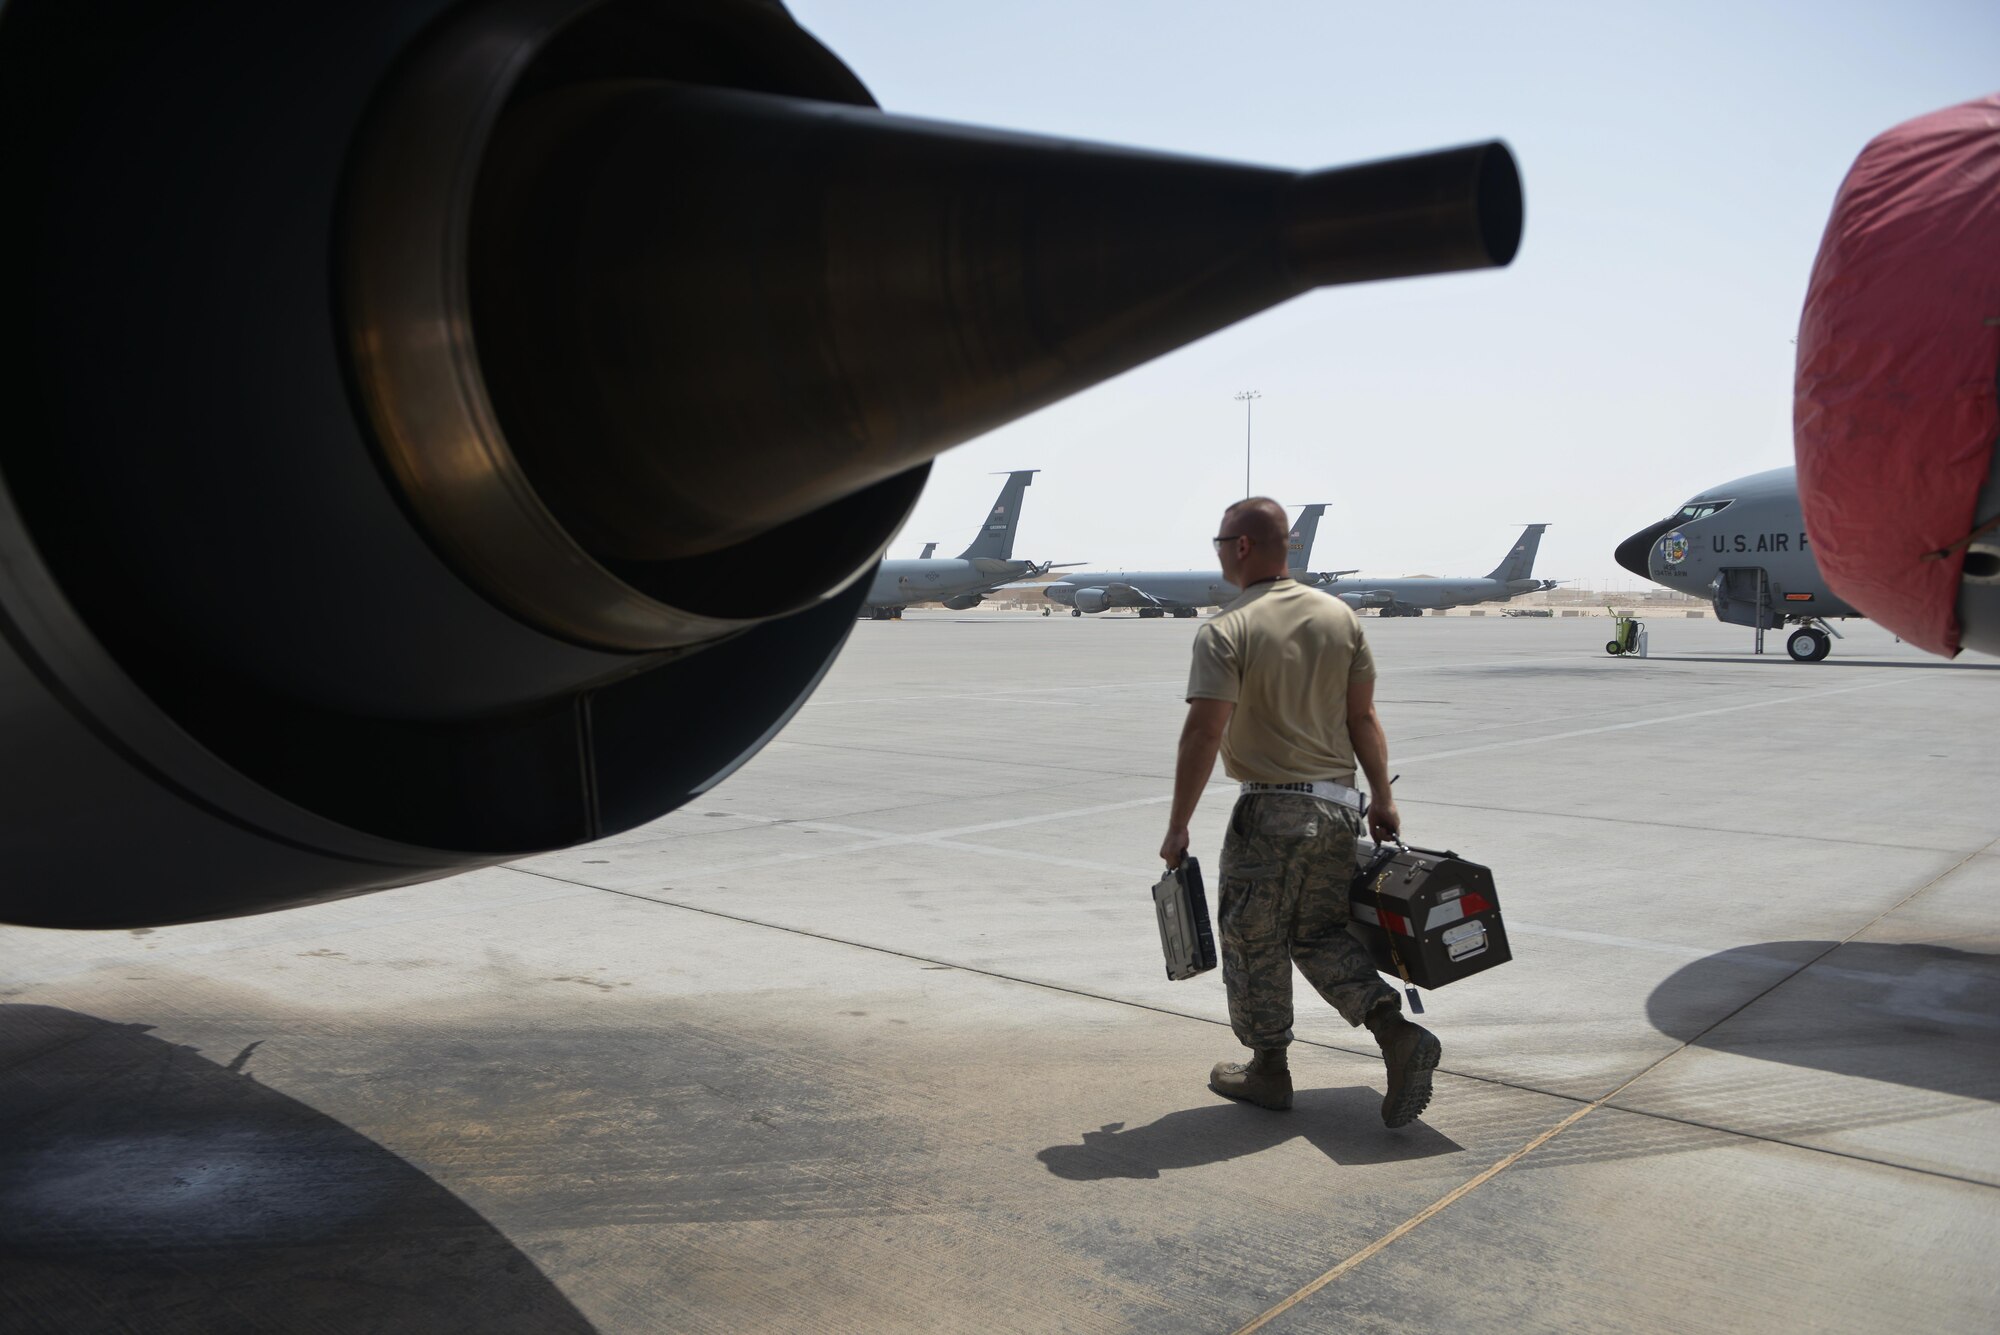 Staff Sgt. David Clark, 379th Expeditionary Maintenance Squadron's fabrication flight, completes his onsite repairs and returns to the maintenance shop for final fabrication of a part August 4, 2015 at Al Udeid Air Base, Qatar. The fabrications flight is partitioned into the aircraft structural maintenance and metal technology sections that make on-site repairs to aircraft deployed to Al Udeid. Most fabrications can be conducted on the flight line. For others, Airmen would bring in the part or create what is needed to keep the aircraft flying within hours. (U.S. Air Force photo/ Staff Sgt. Alexandre Montes)